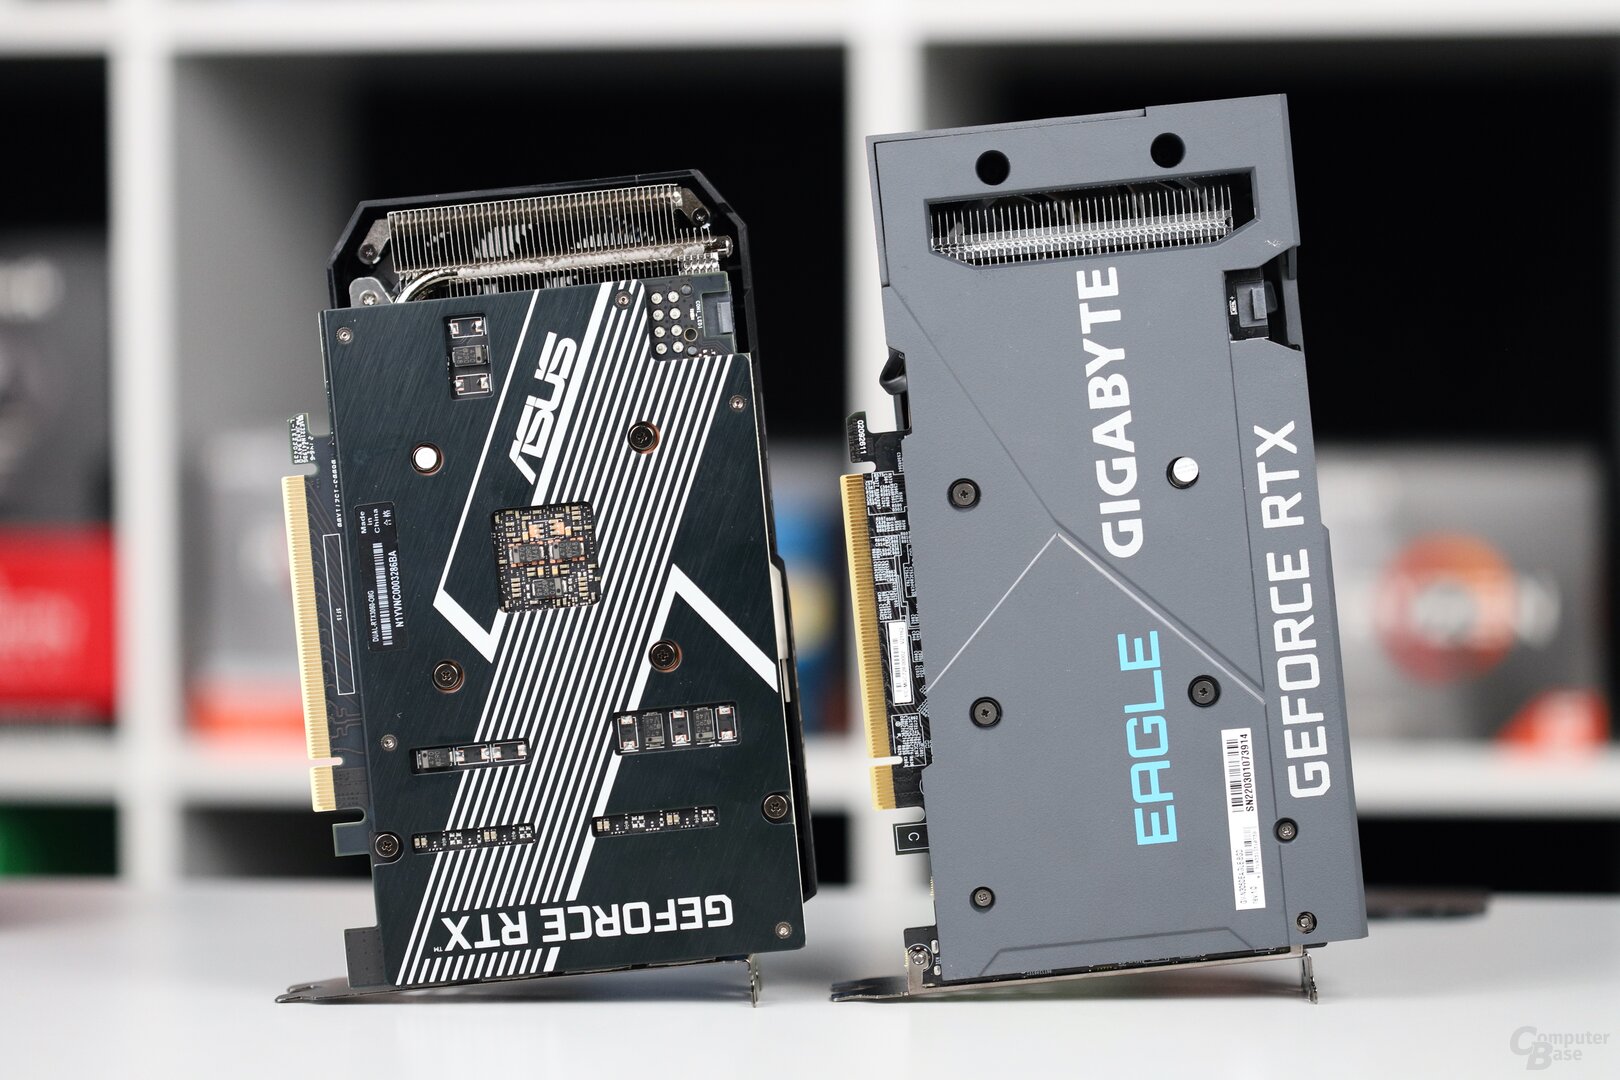 GeForce RTX 3050 from Asus (left) and Gigabyte (right) in the test